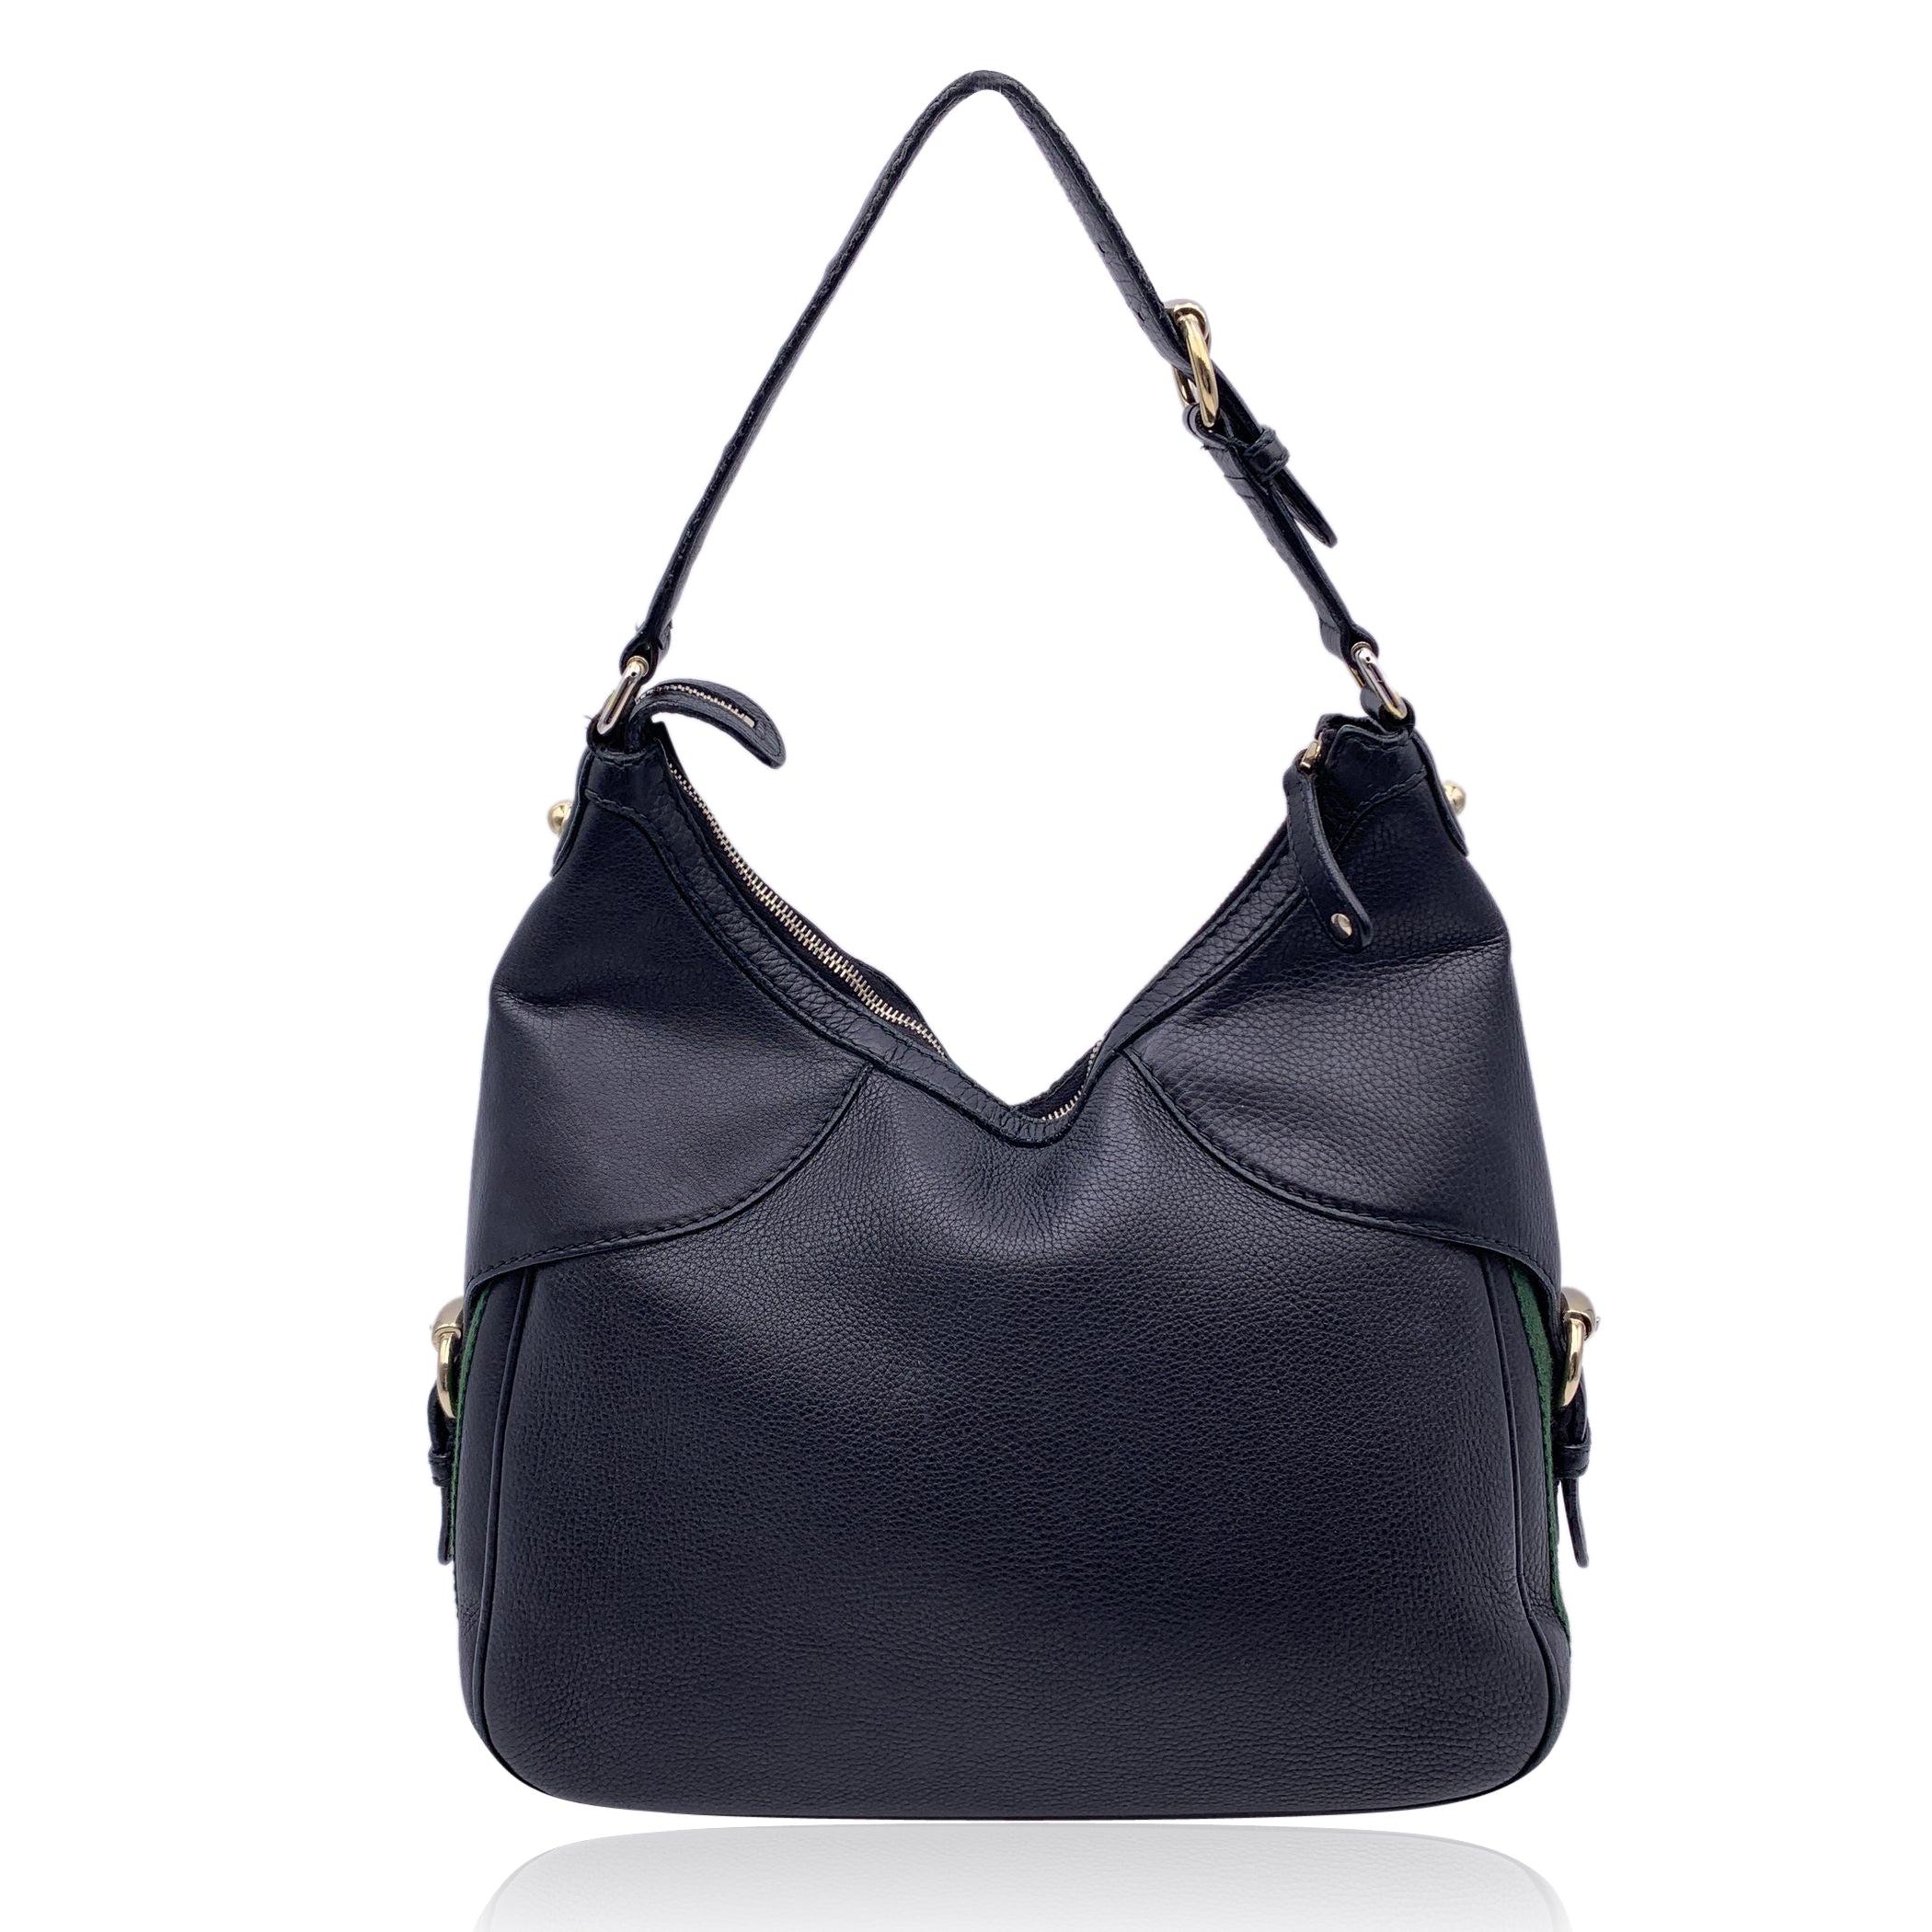 Gucci Black Leather Heritage Horsebit Hobo Shoulder Bag In Good Condition For Sale In Rome, Rome